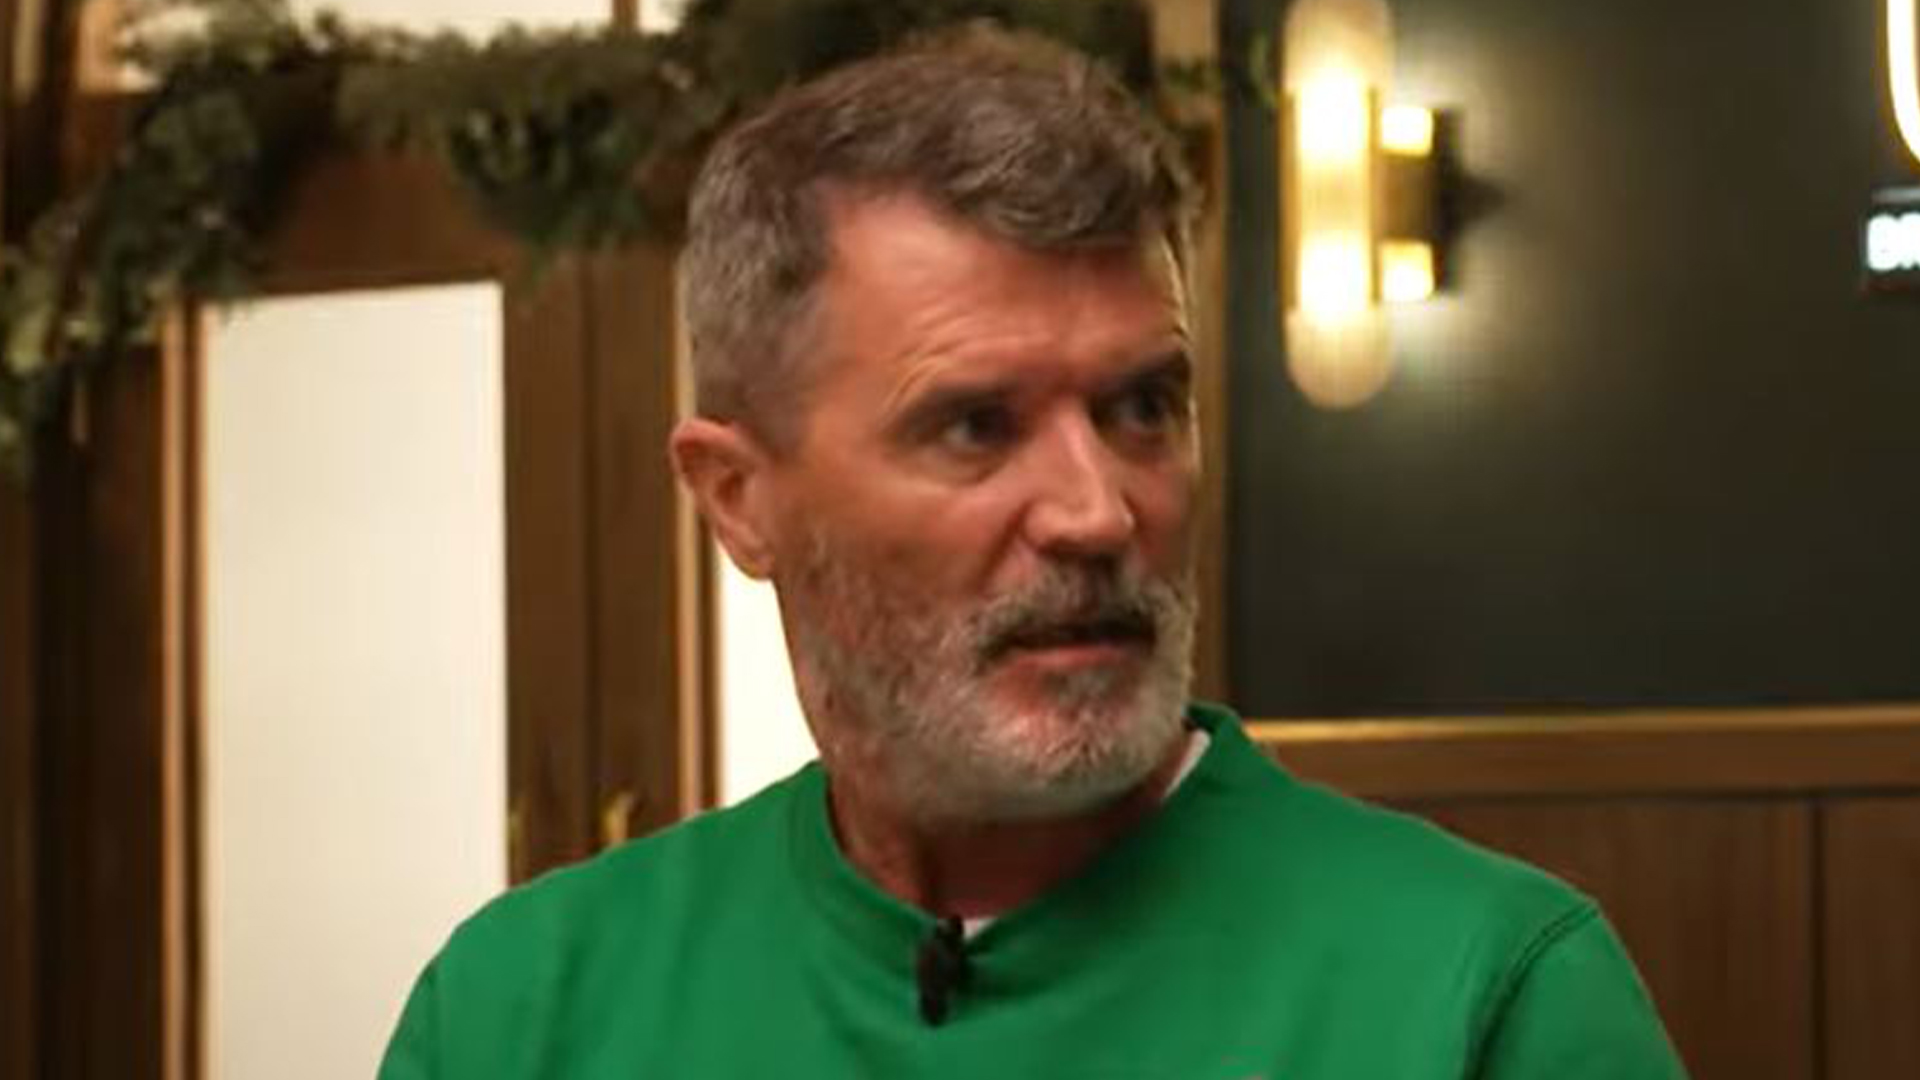 Roy Keane reveals he was BANNED from Man Utd Christmas party after Sir Alex Ferguson's brutal warning to dressing room